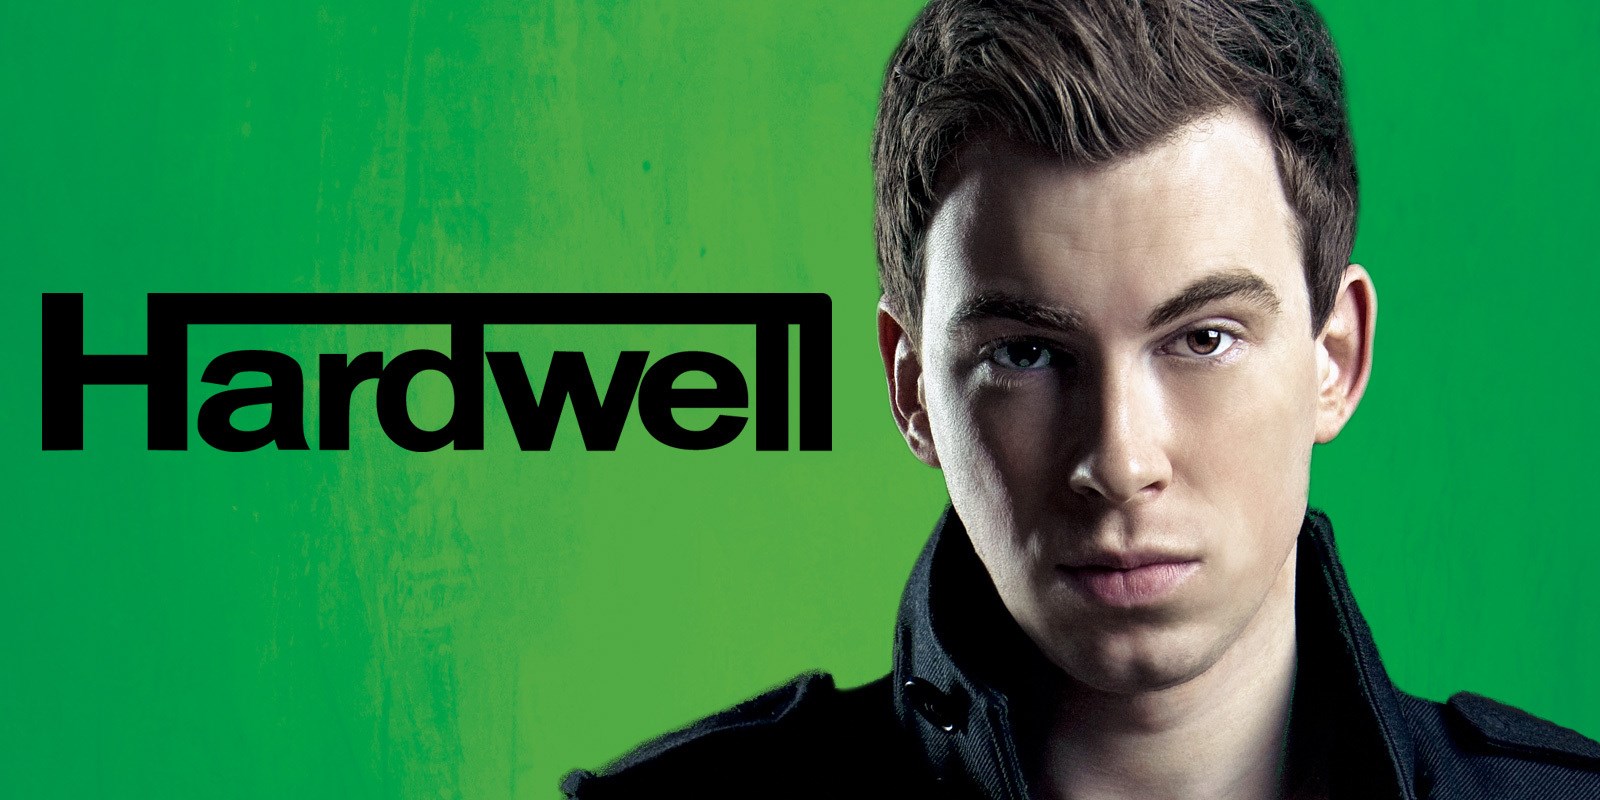 World&#39;s No. 1 DJ Hardwell to Perform in Indy 500 Snake Pit